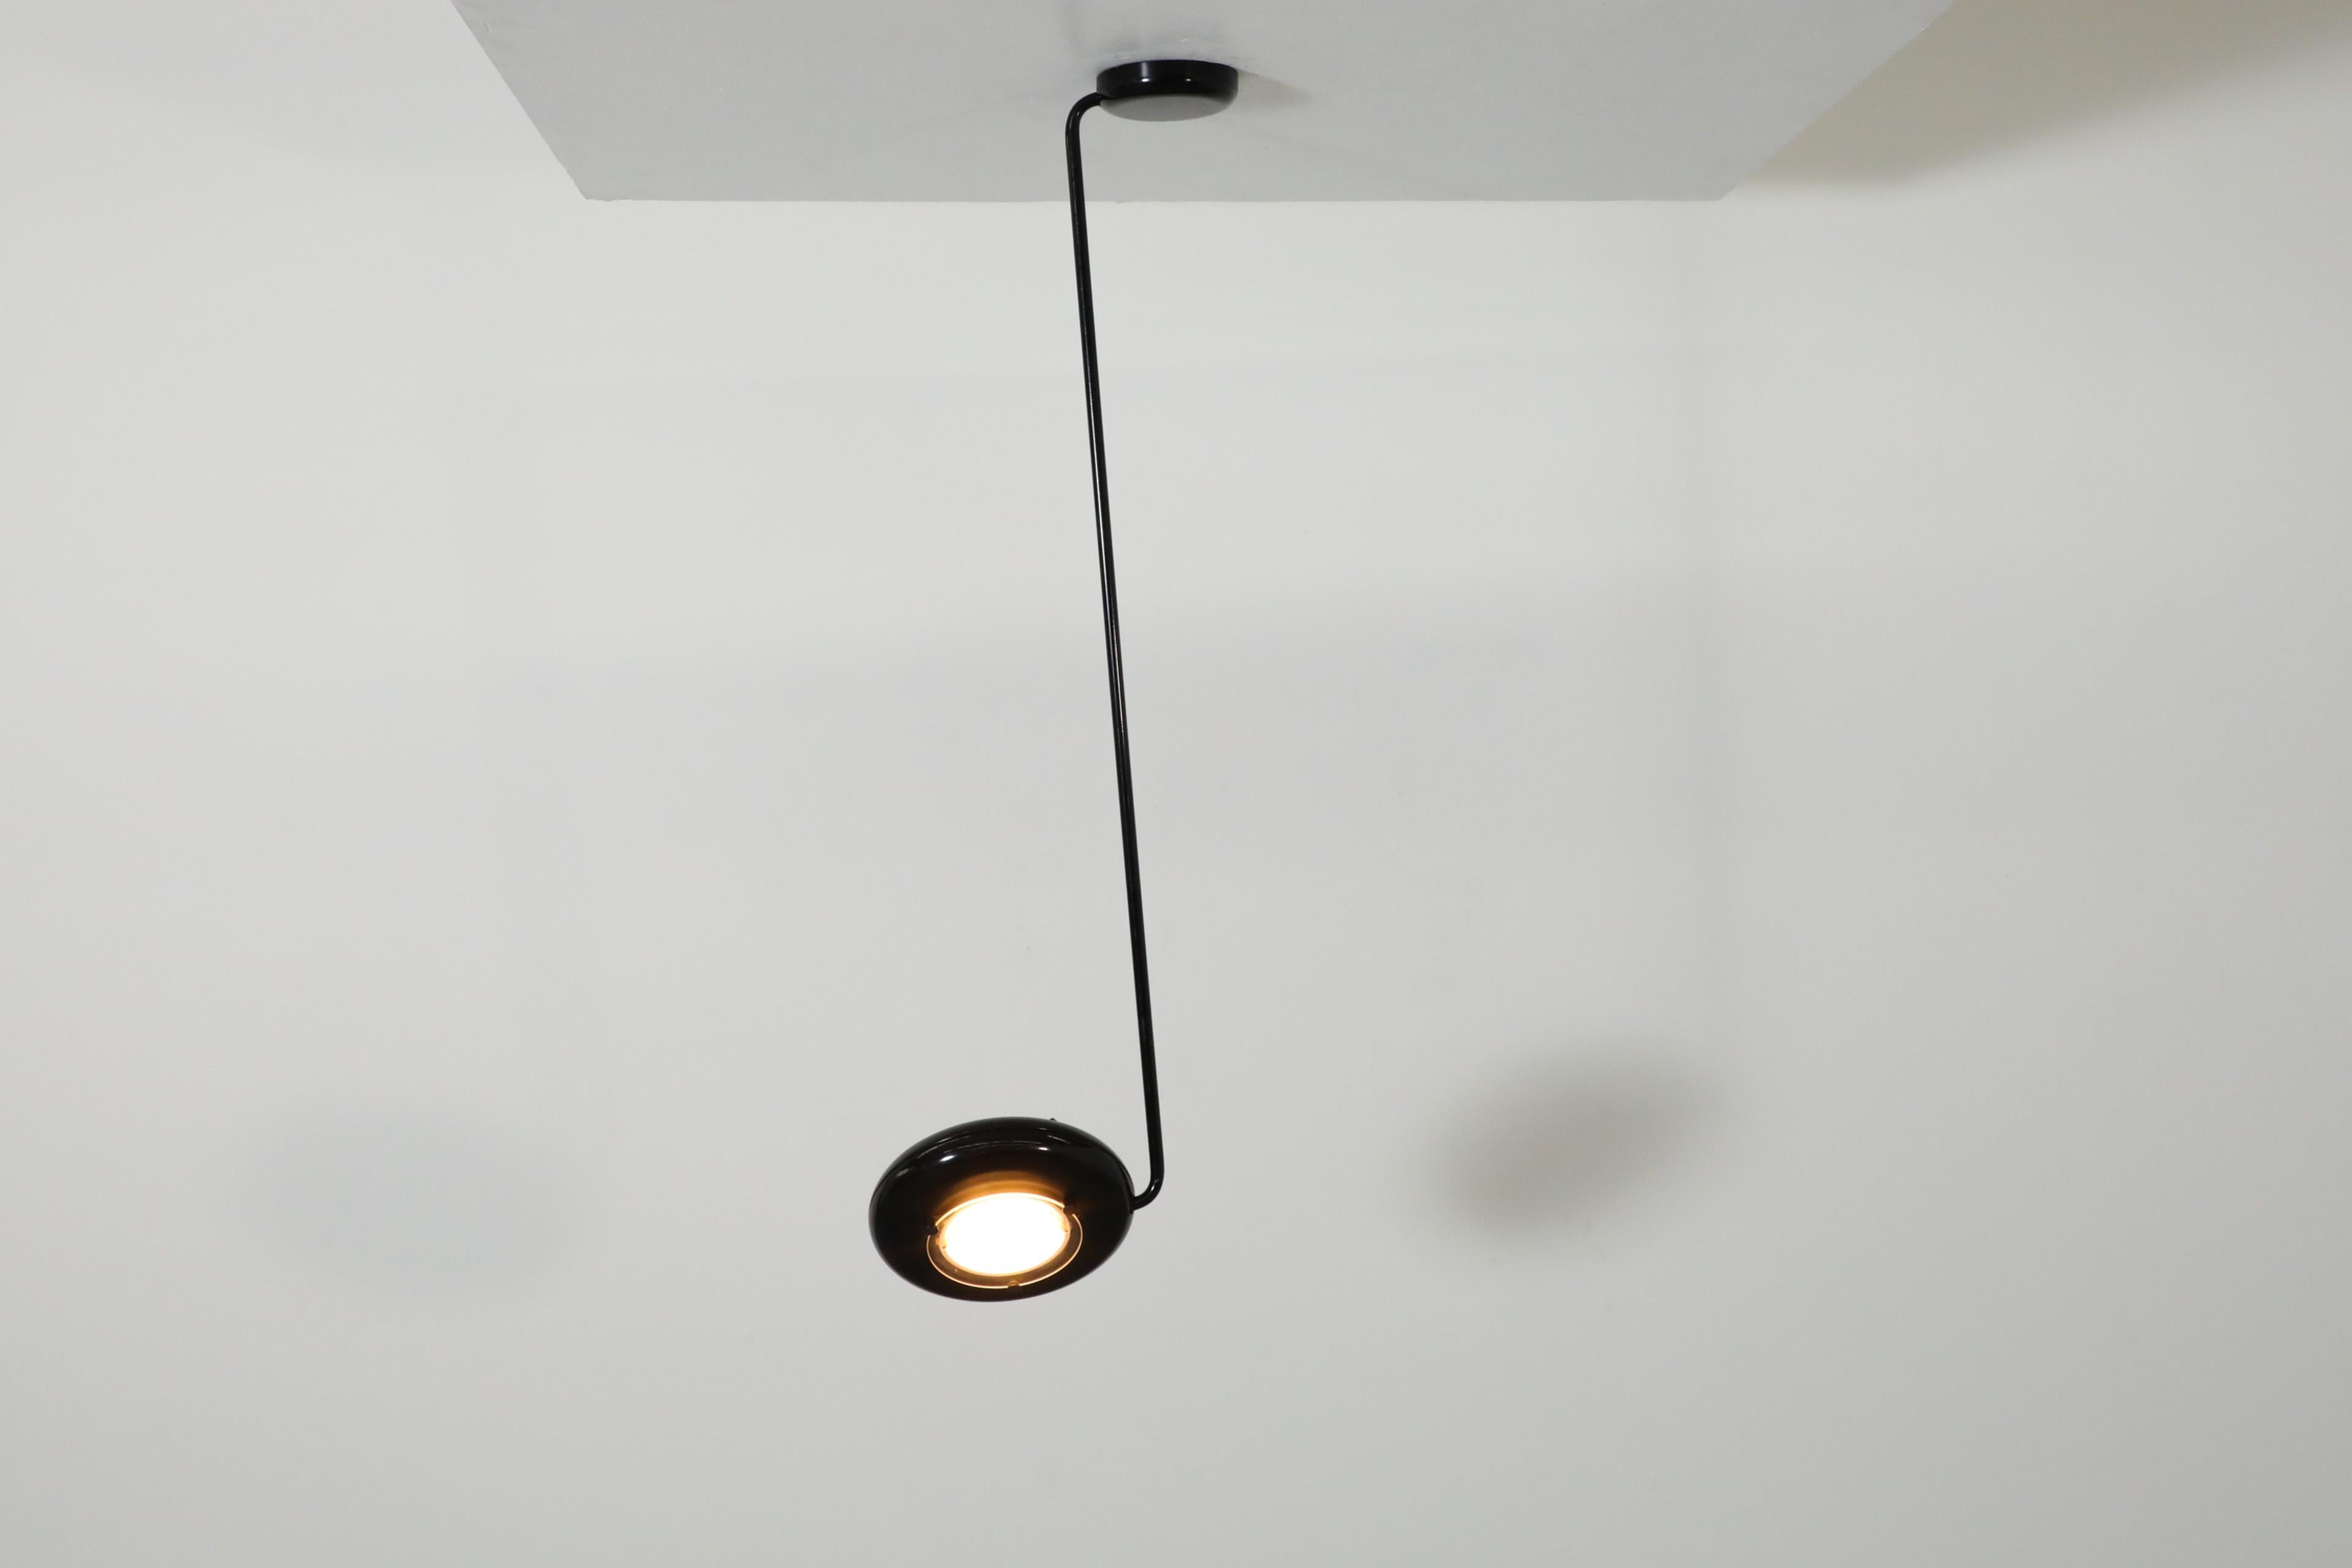 MOD black ceiling mount light with dimmable halogen bulb inspired by Tommaso Cimini's 'Elle' lamps of 1984. This strikingly designed flush mount lamp is adjustable as the arm swings back and forth and has a rotating head. It  is as eye catching as